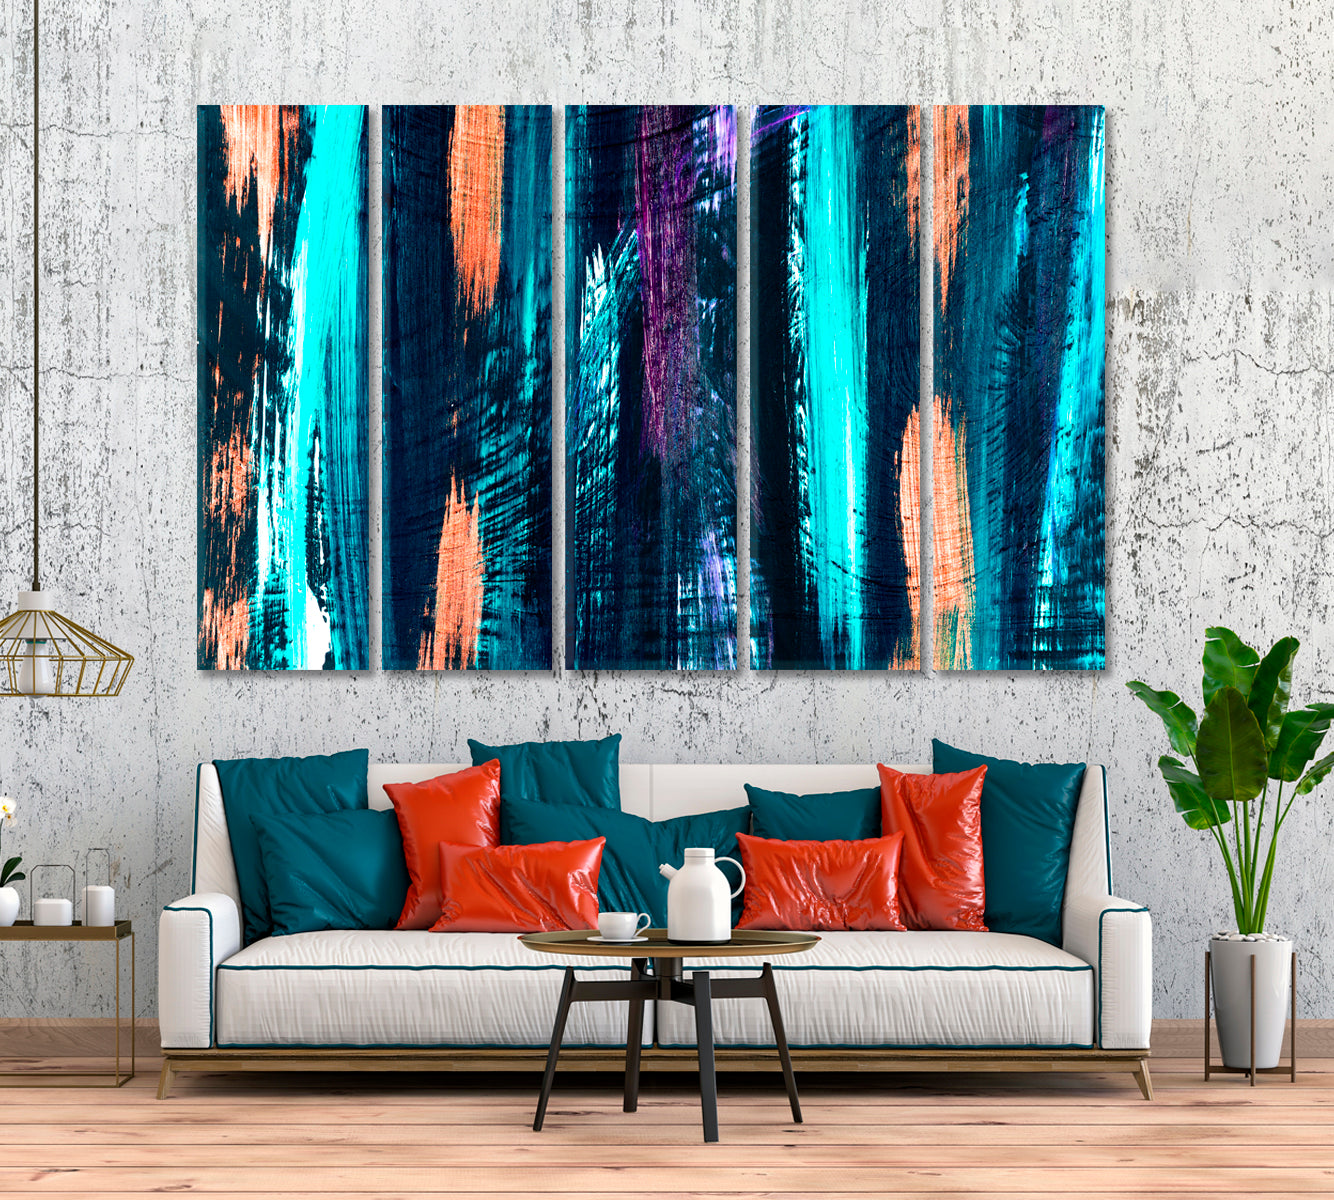 Creative Abstract Colorful Stripes Canvas Print ArtLexy 5 Panels 36"x24" inches 